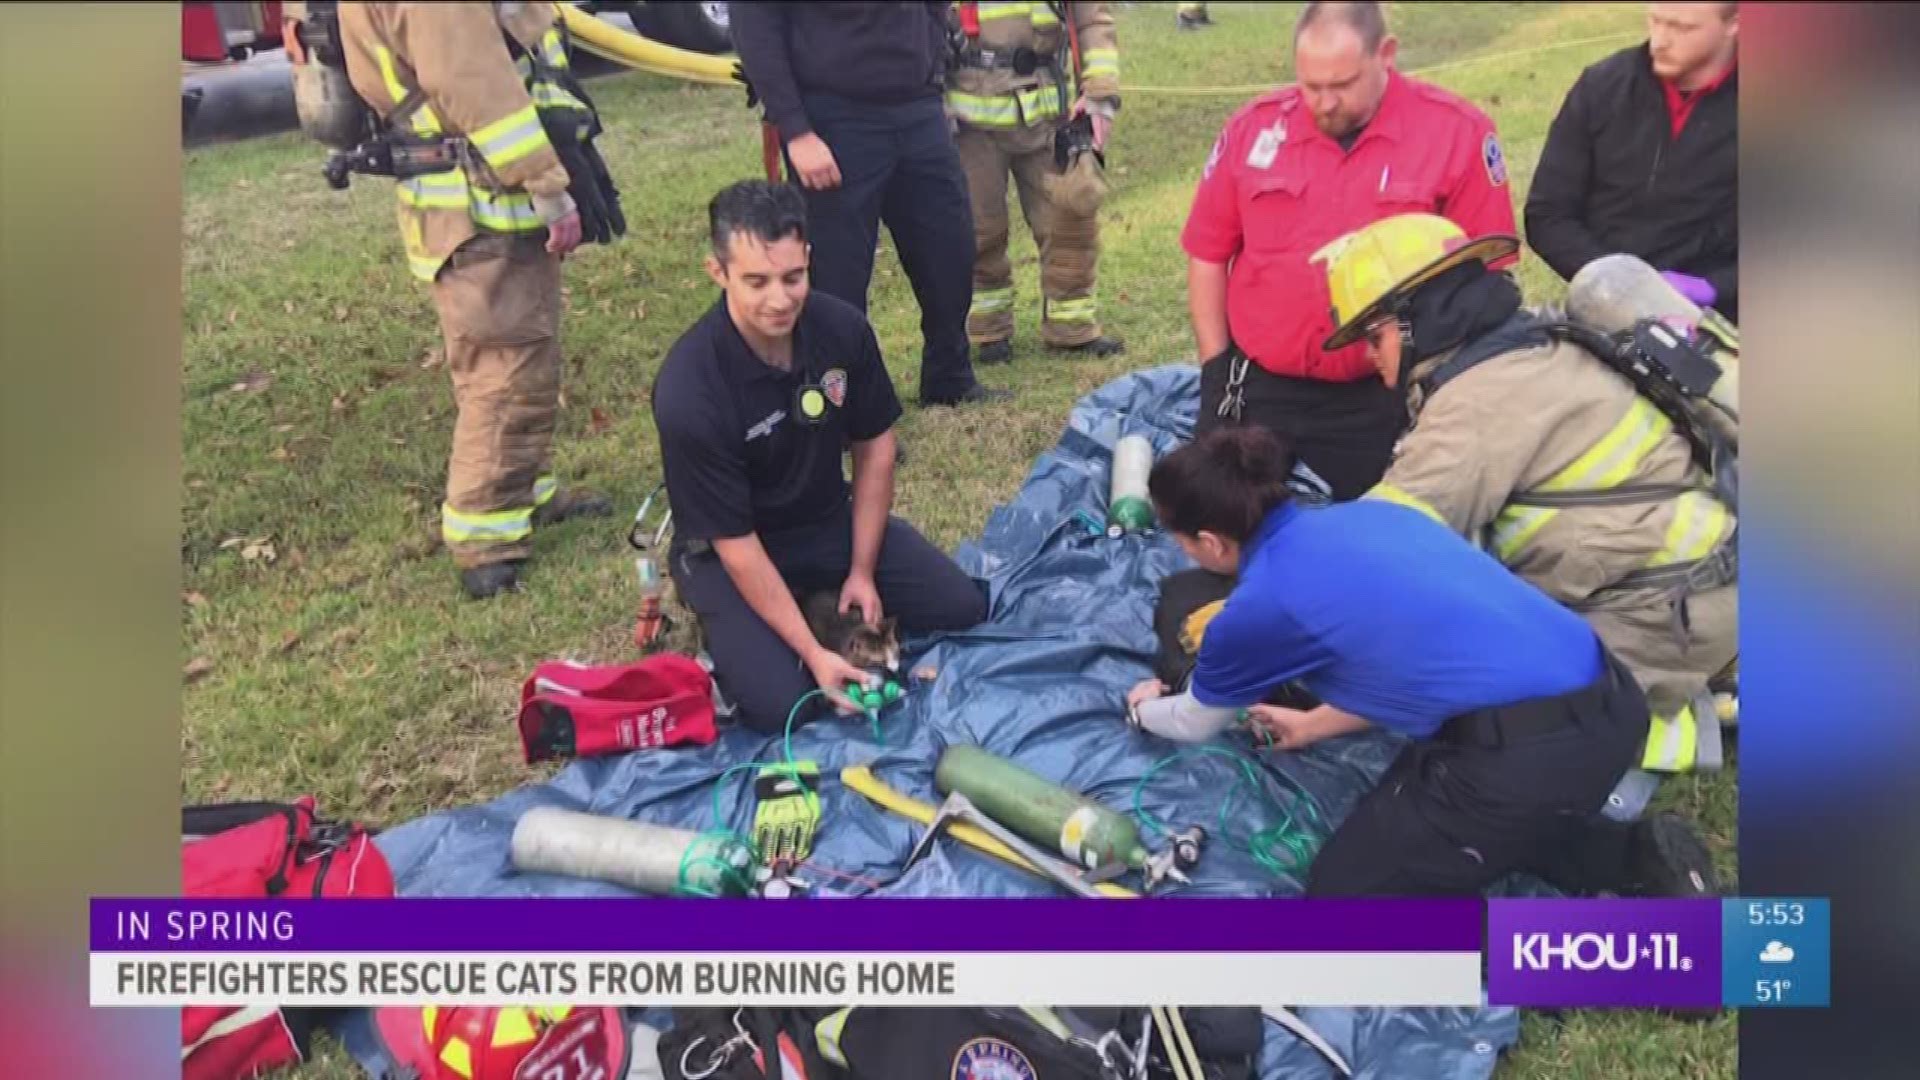 Firefighters used their special pet oxygen masks to help three cats they rescued from a burning house in Spring on Sunday.